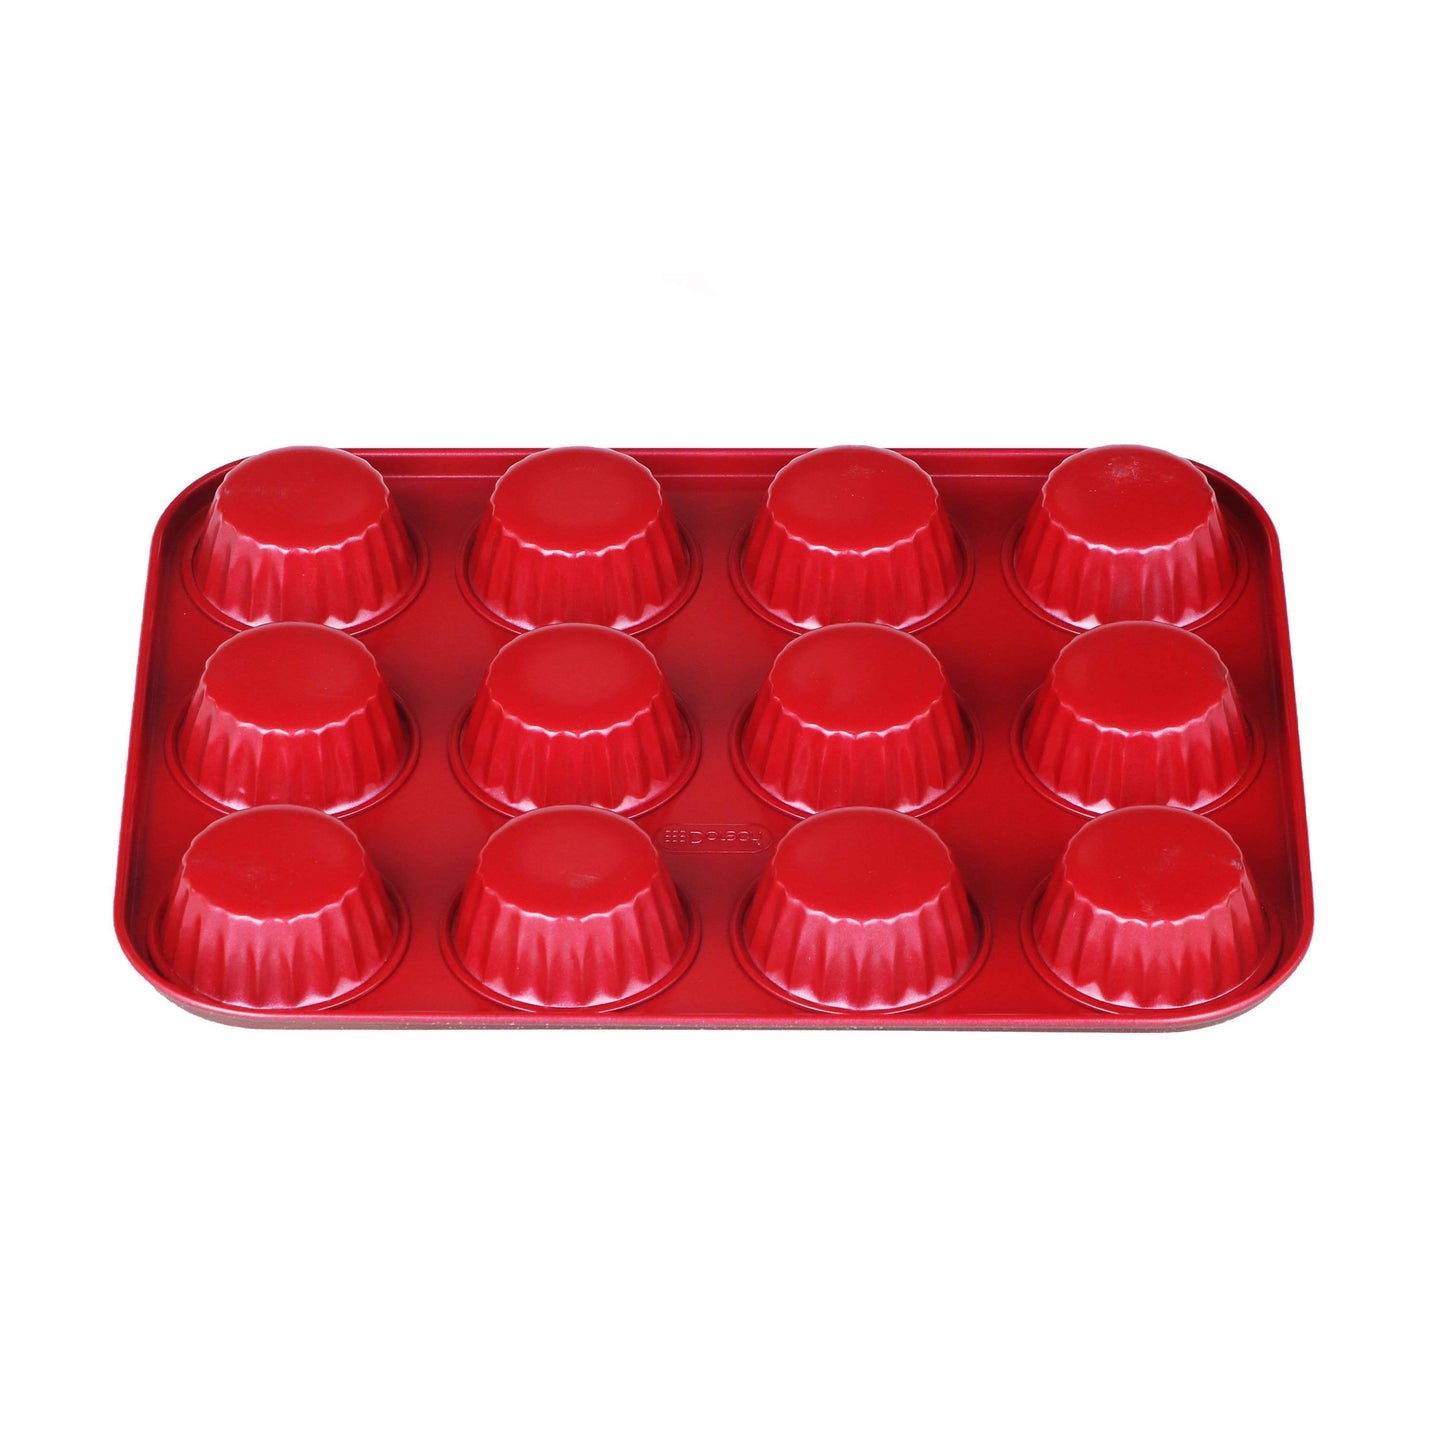 Striped Muffin Pan 12 cups-Royal Brands Co-